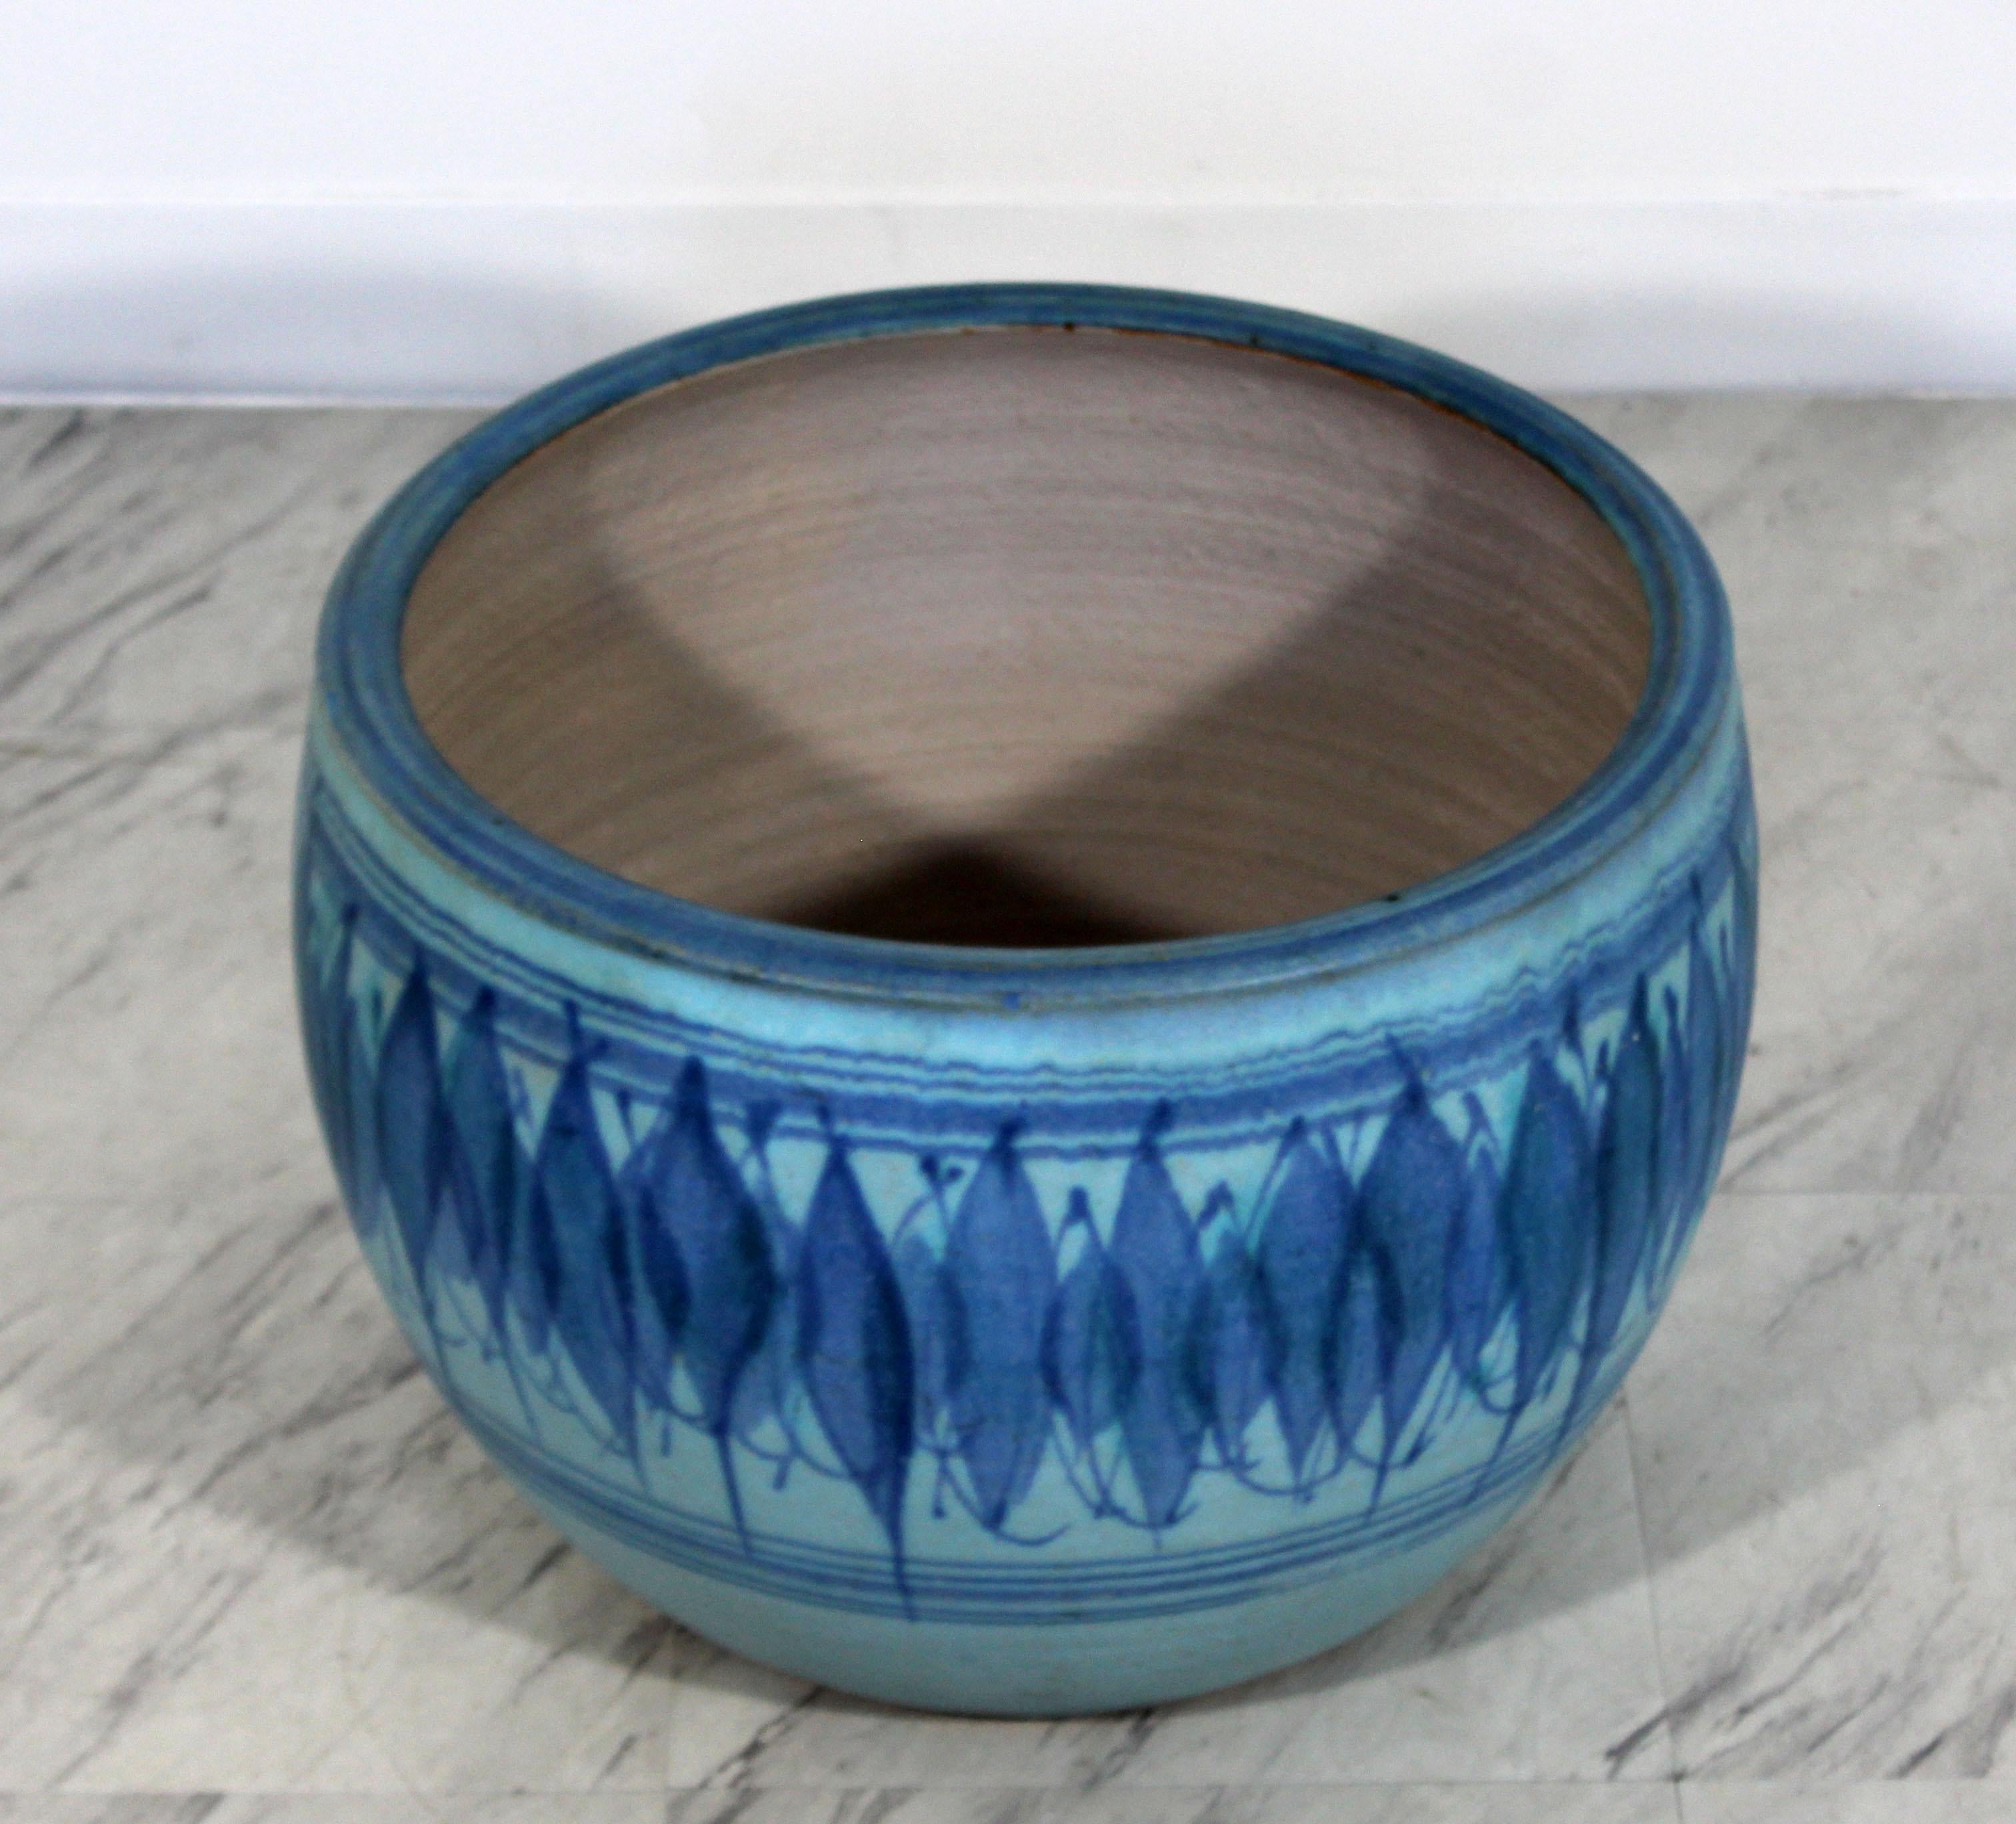 For your consideration is a, rare, large, exquisite, blue glazed ceramic pot, signed by J.T. Abernathy, circa 1960s. Cranbrook Studio artist. In excellent condition. The dimensions are 17